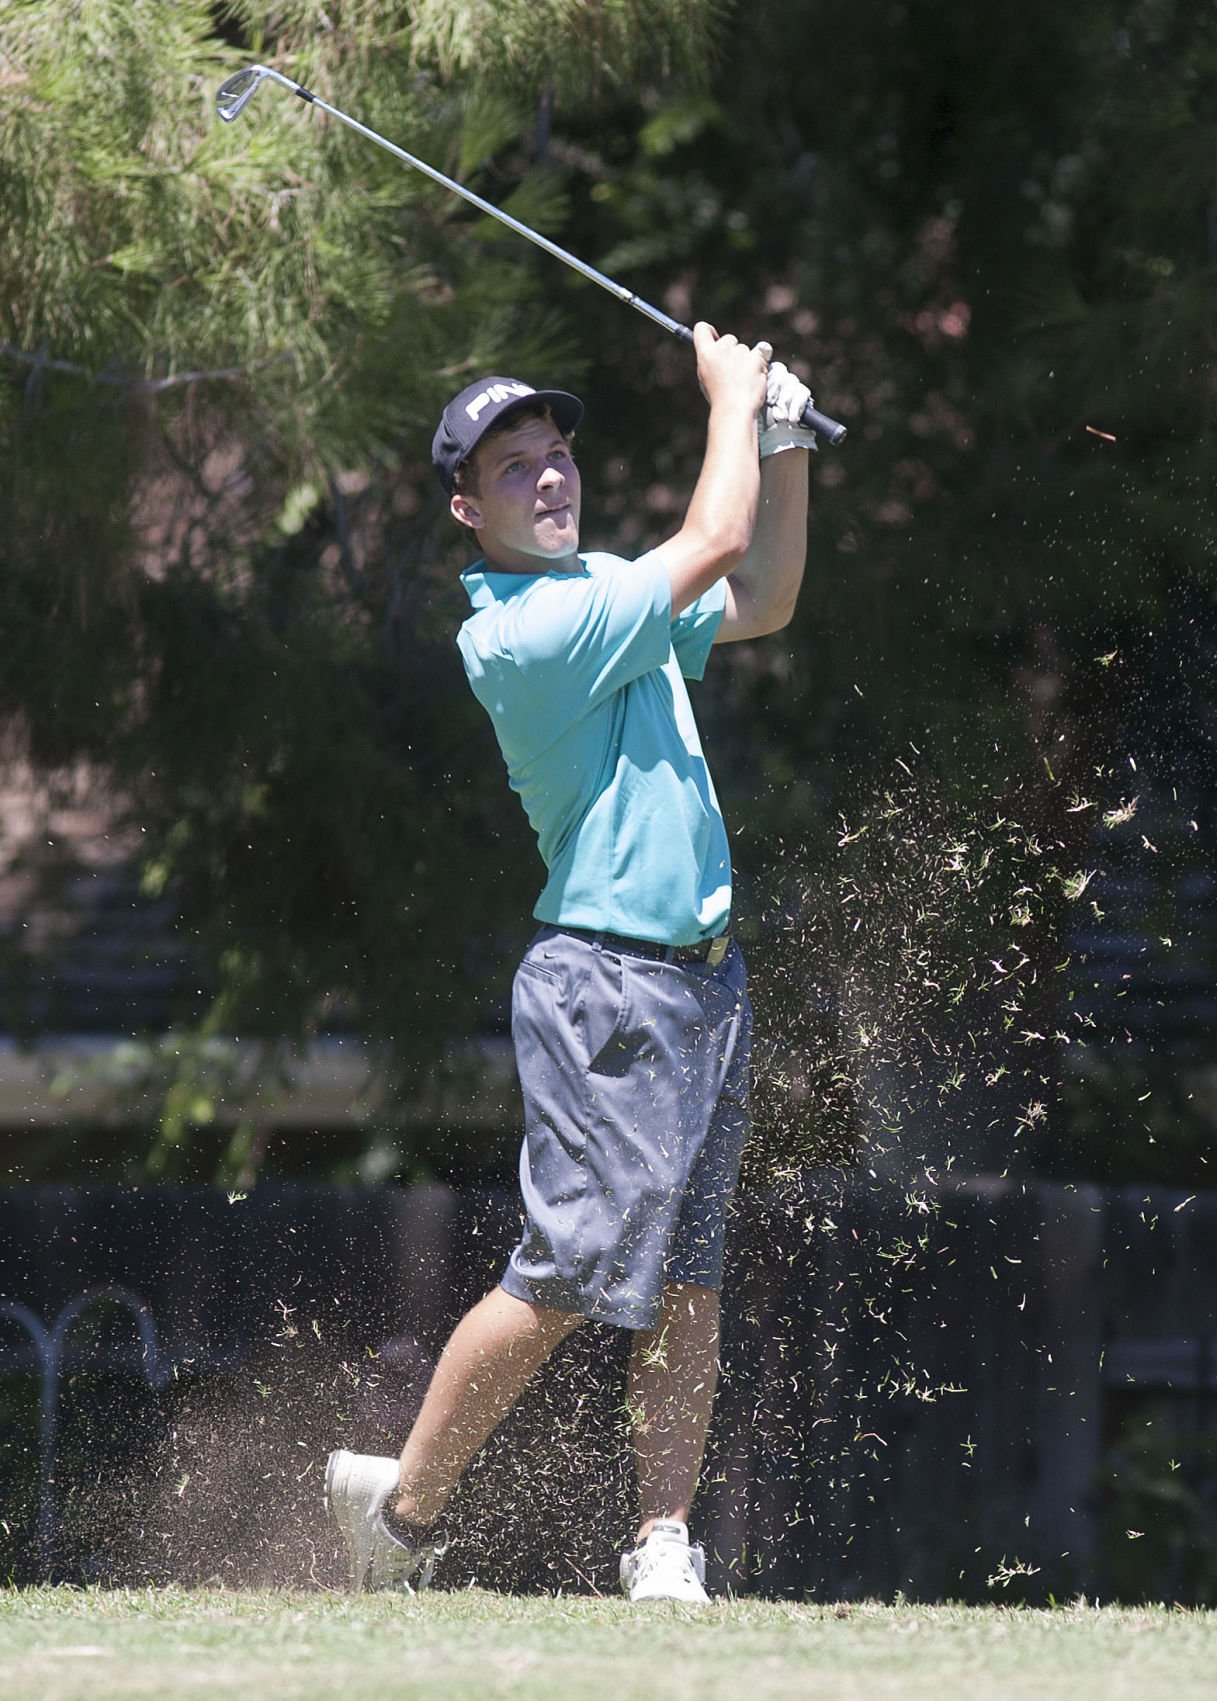 39th Annual City Golf Championship ready to tee off Sports bakersfield pic